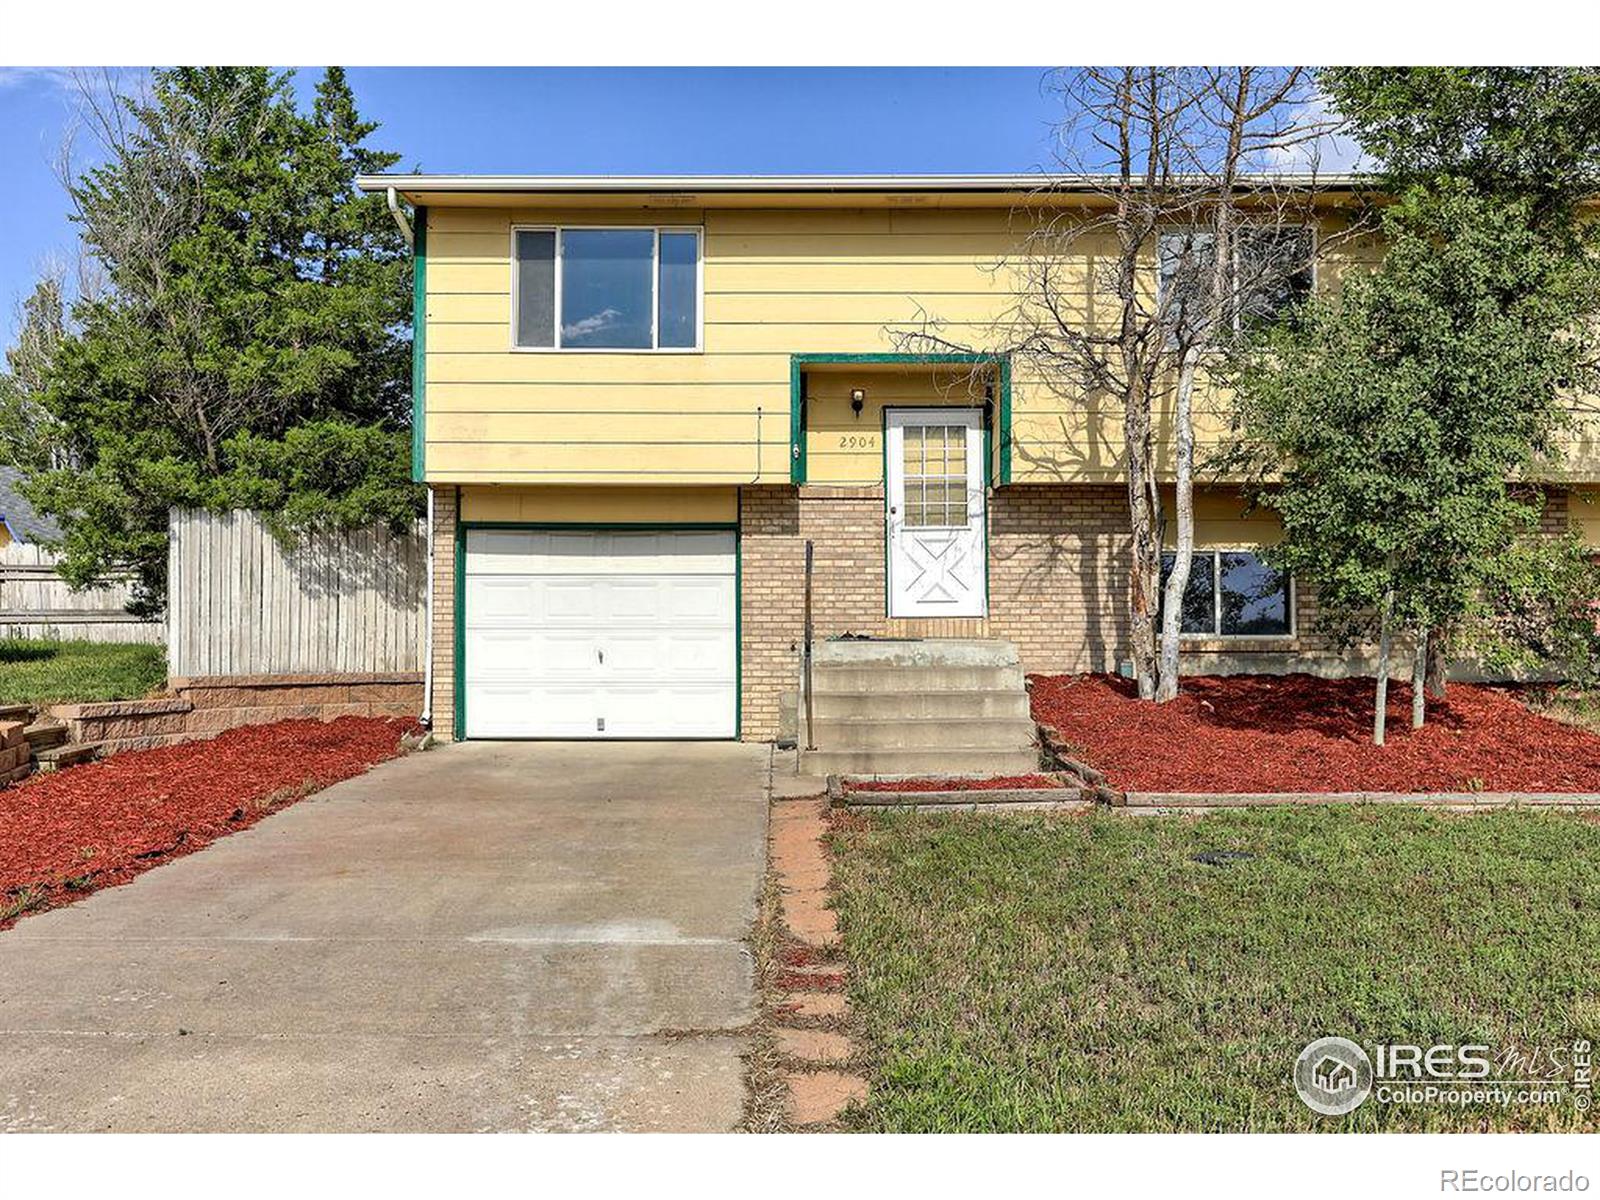 2904  14th Ave Ct, greeley MLS: 456789994904 Beds: 3 Baths: 1 Price: $314,900